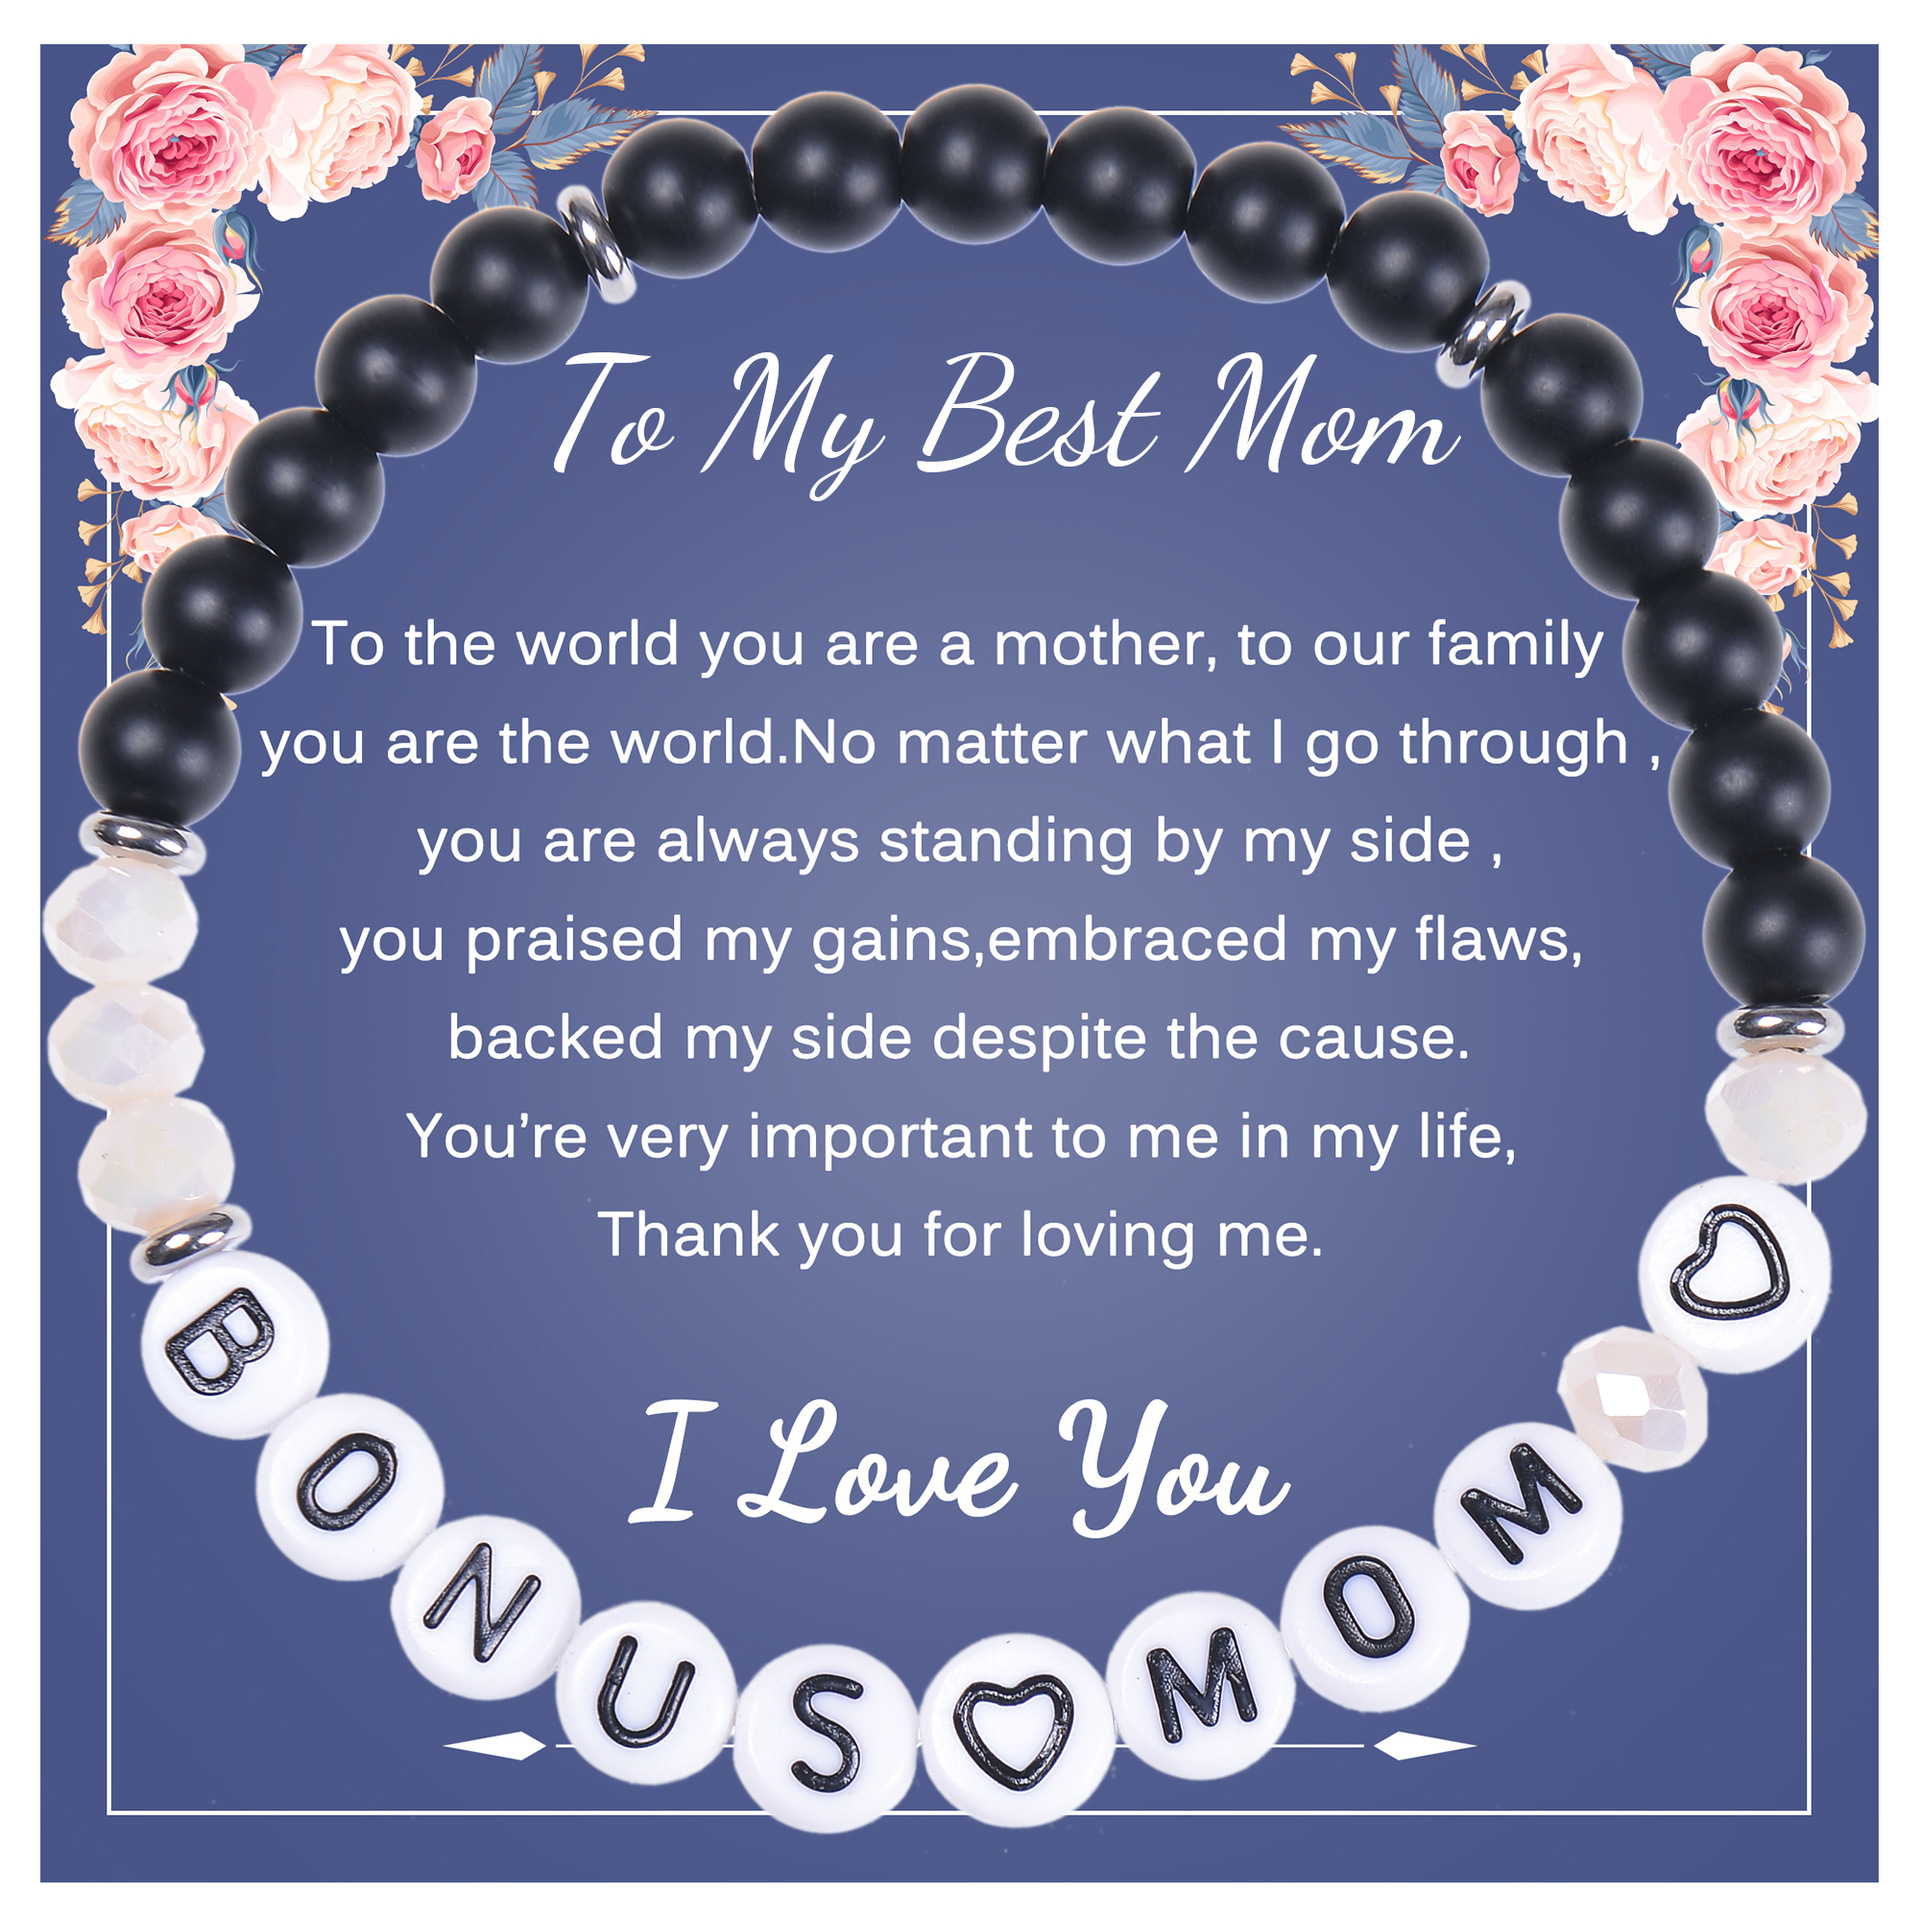 2:To My Best Mom